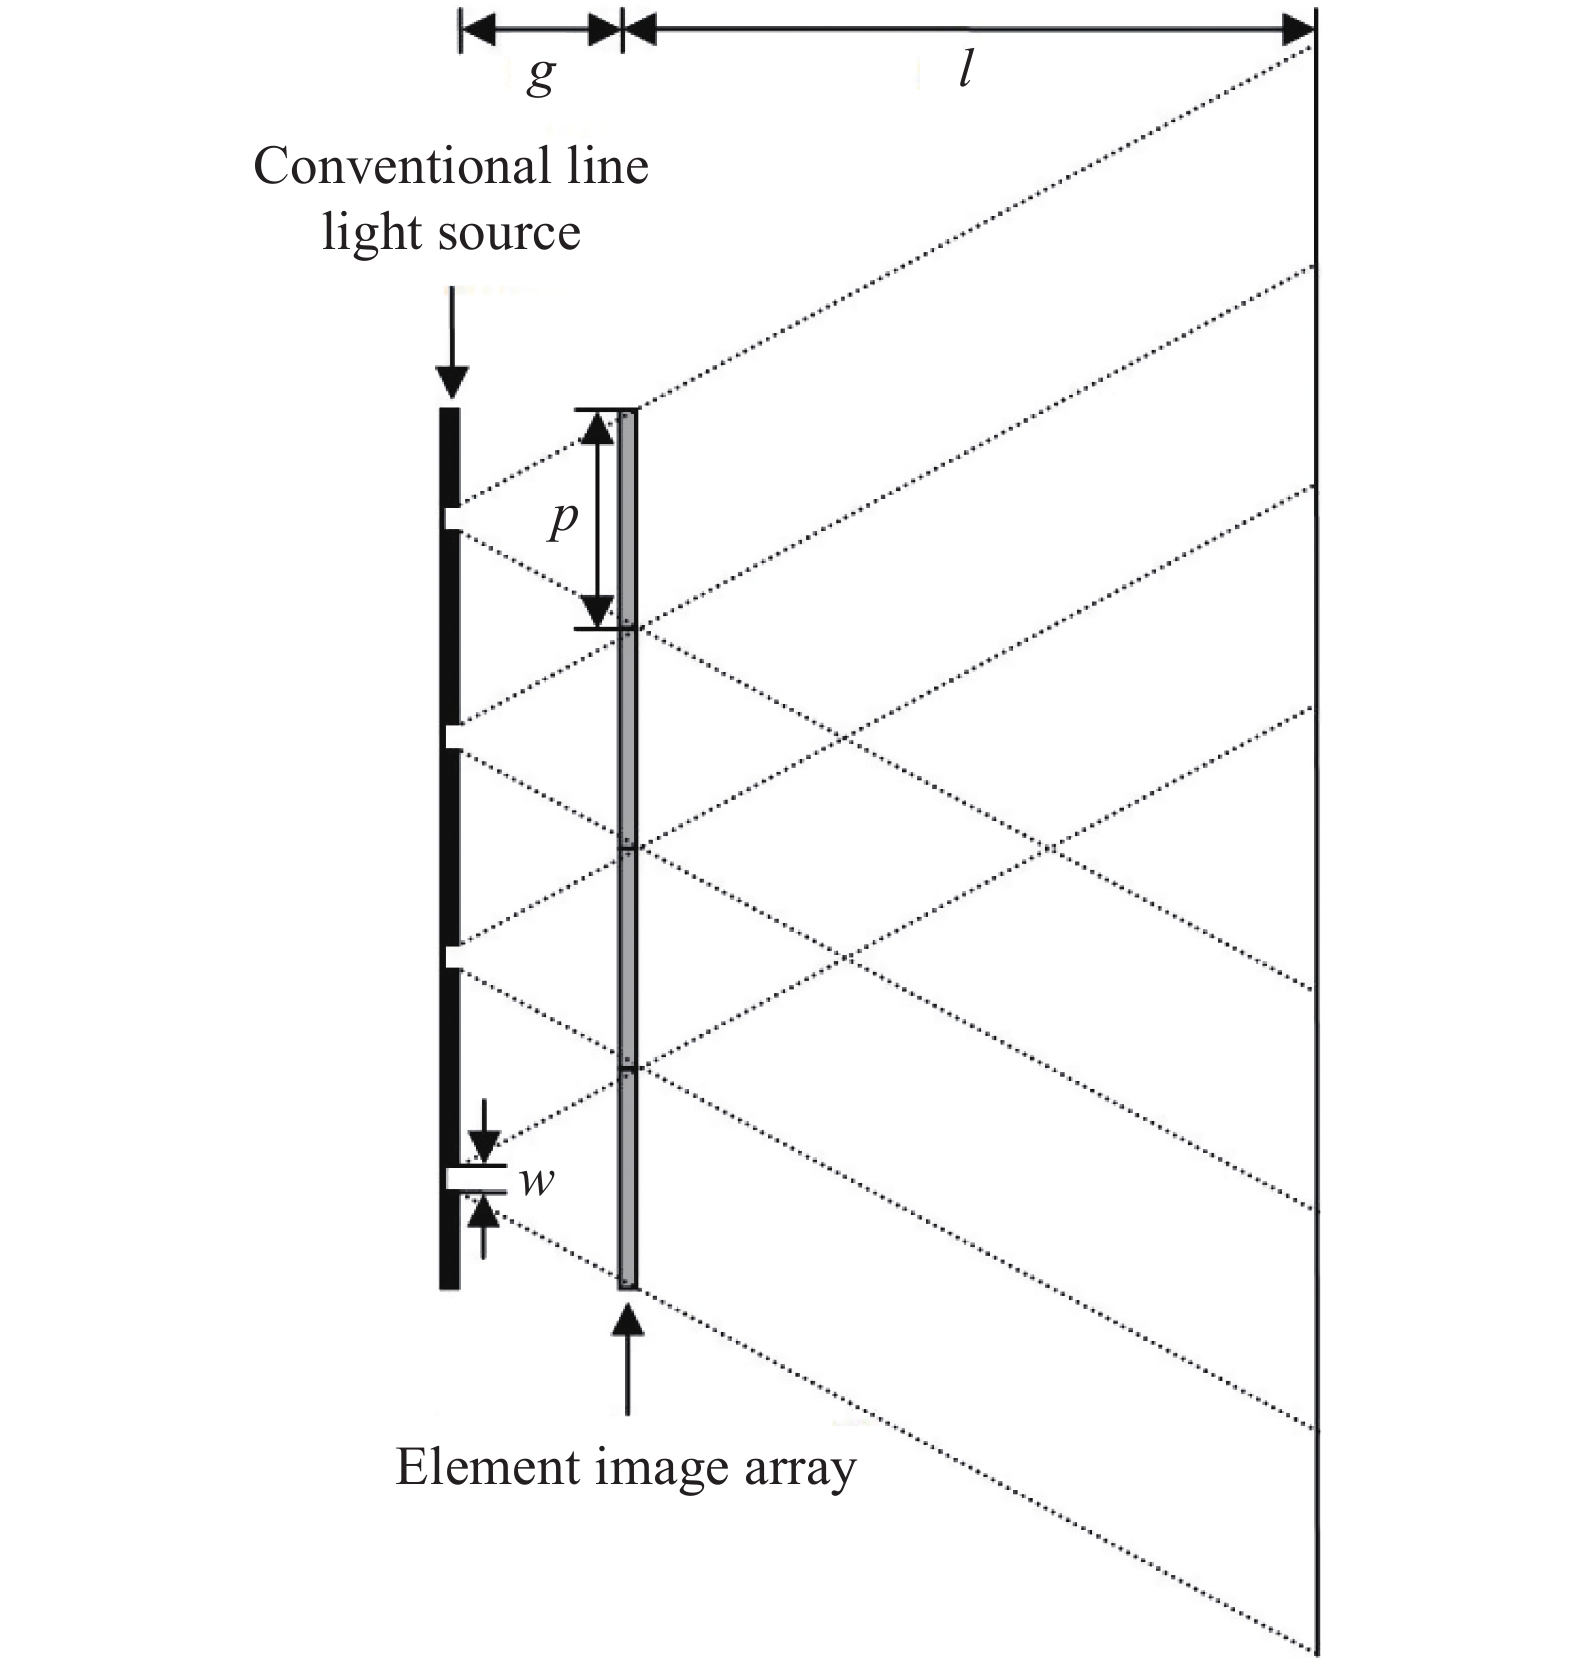 Parameter of the integral imaging 3D display based on a conventional line light source